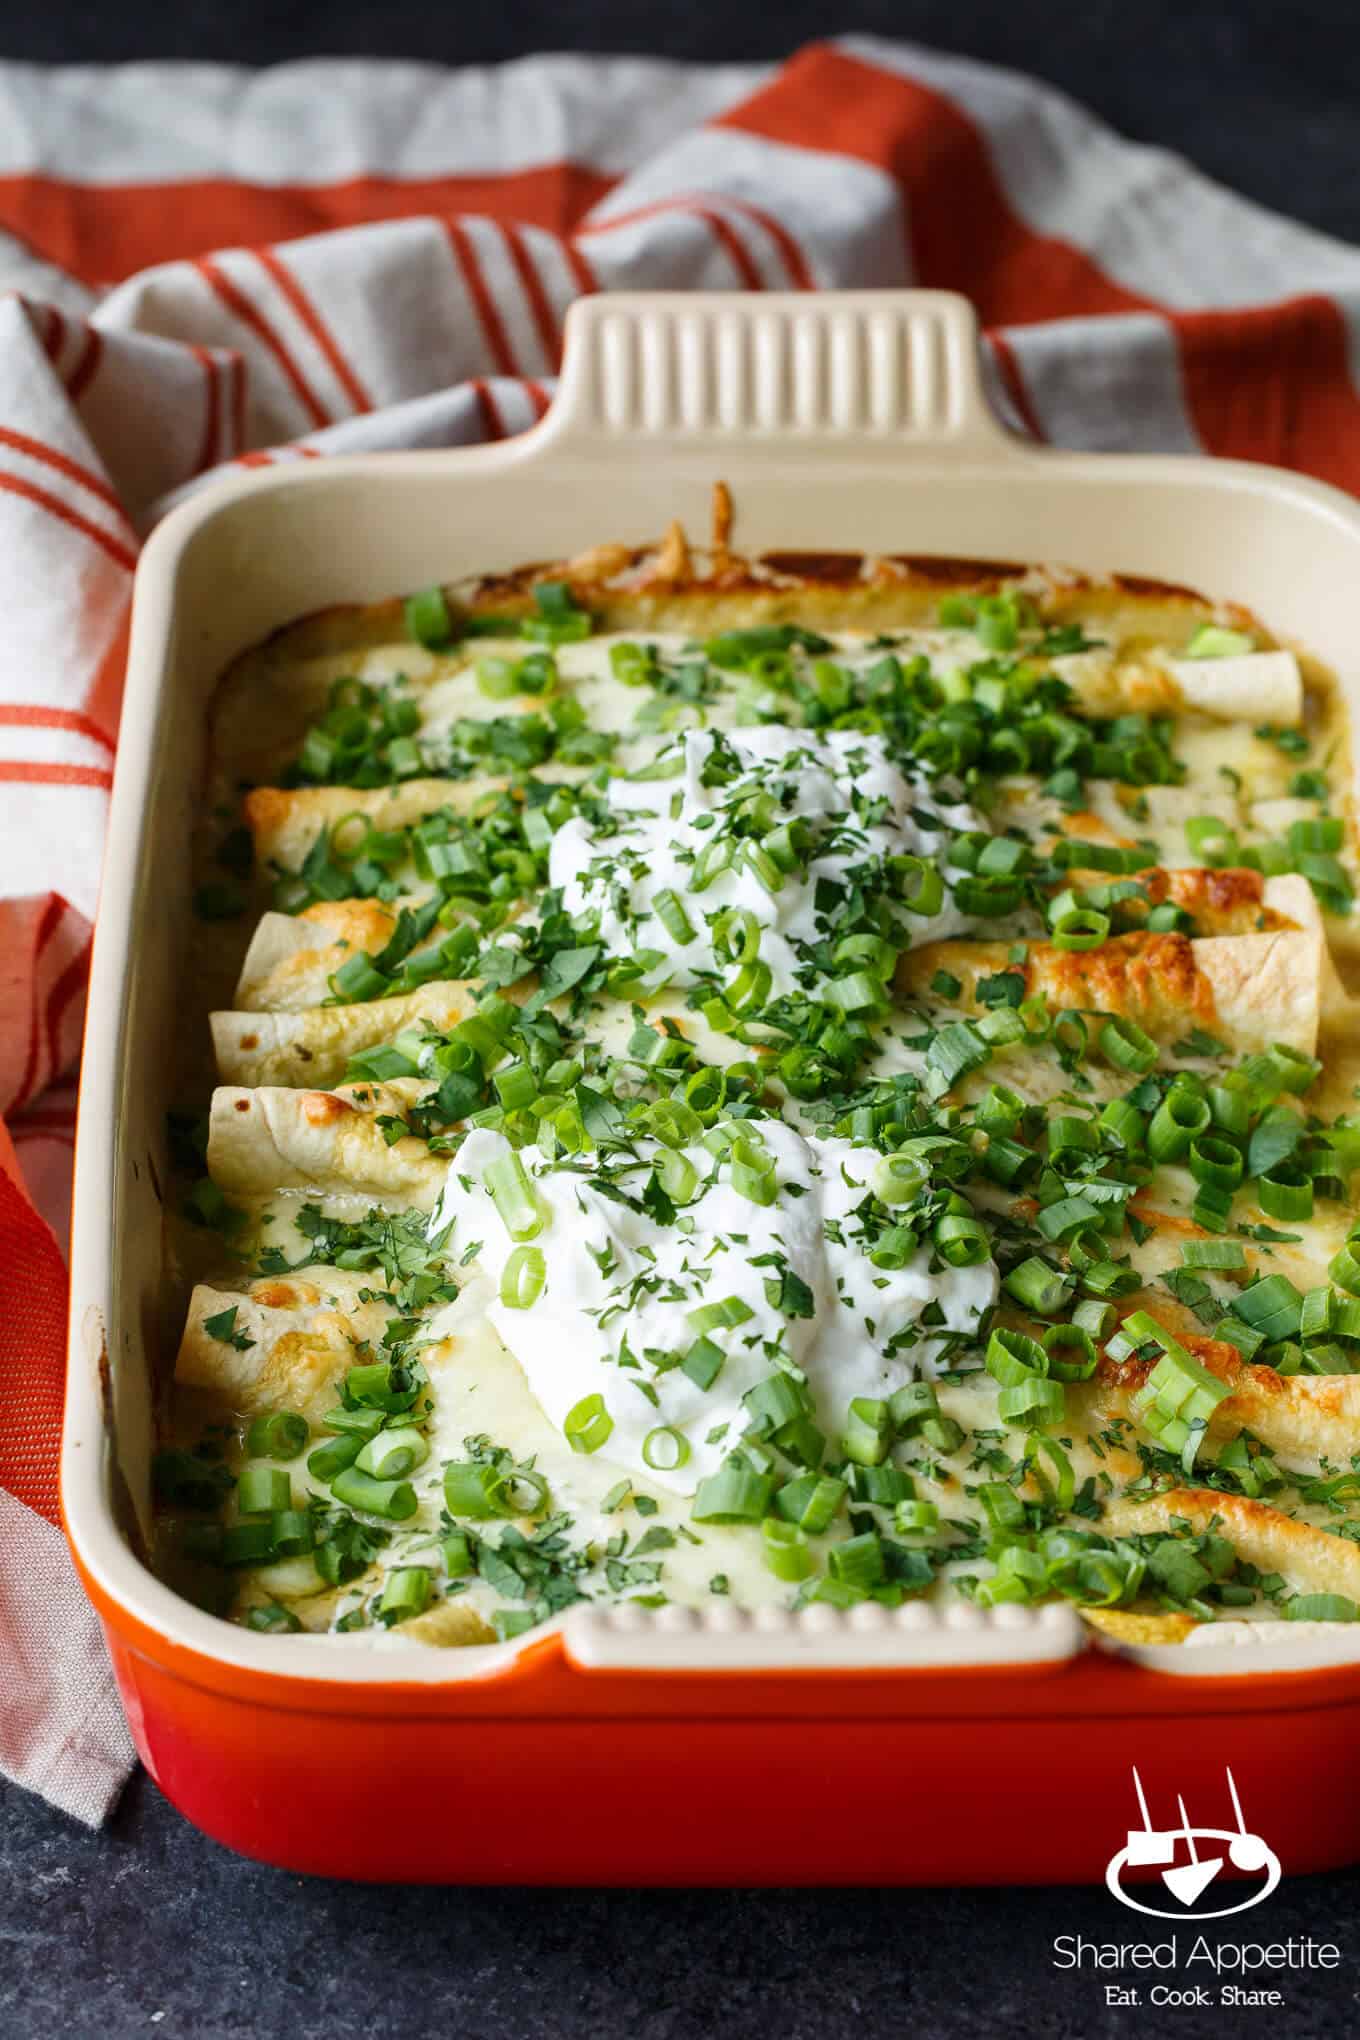 Hidden Veggie Chicken Enchiladas with Zucchini, Spinach, and Corn in a Green Chile Sauce are Family Friendly! | sharedappetite.com